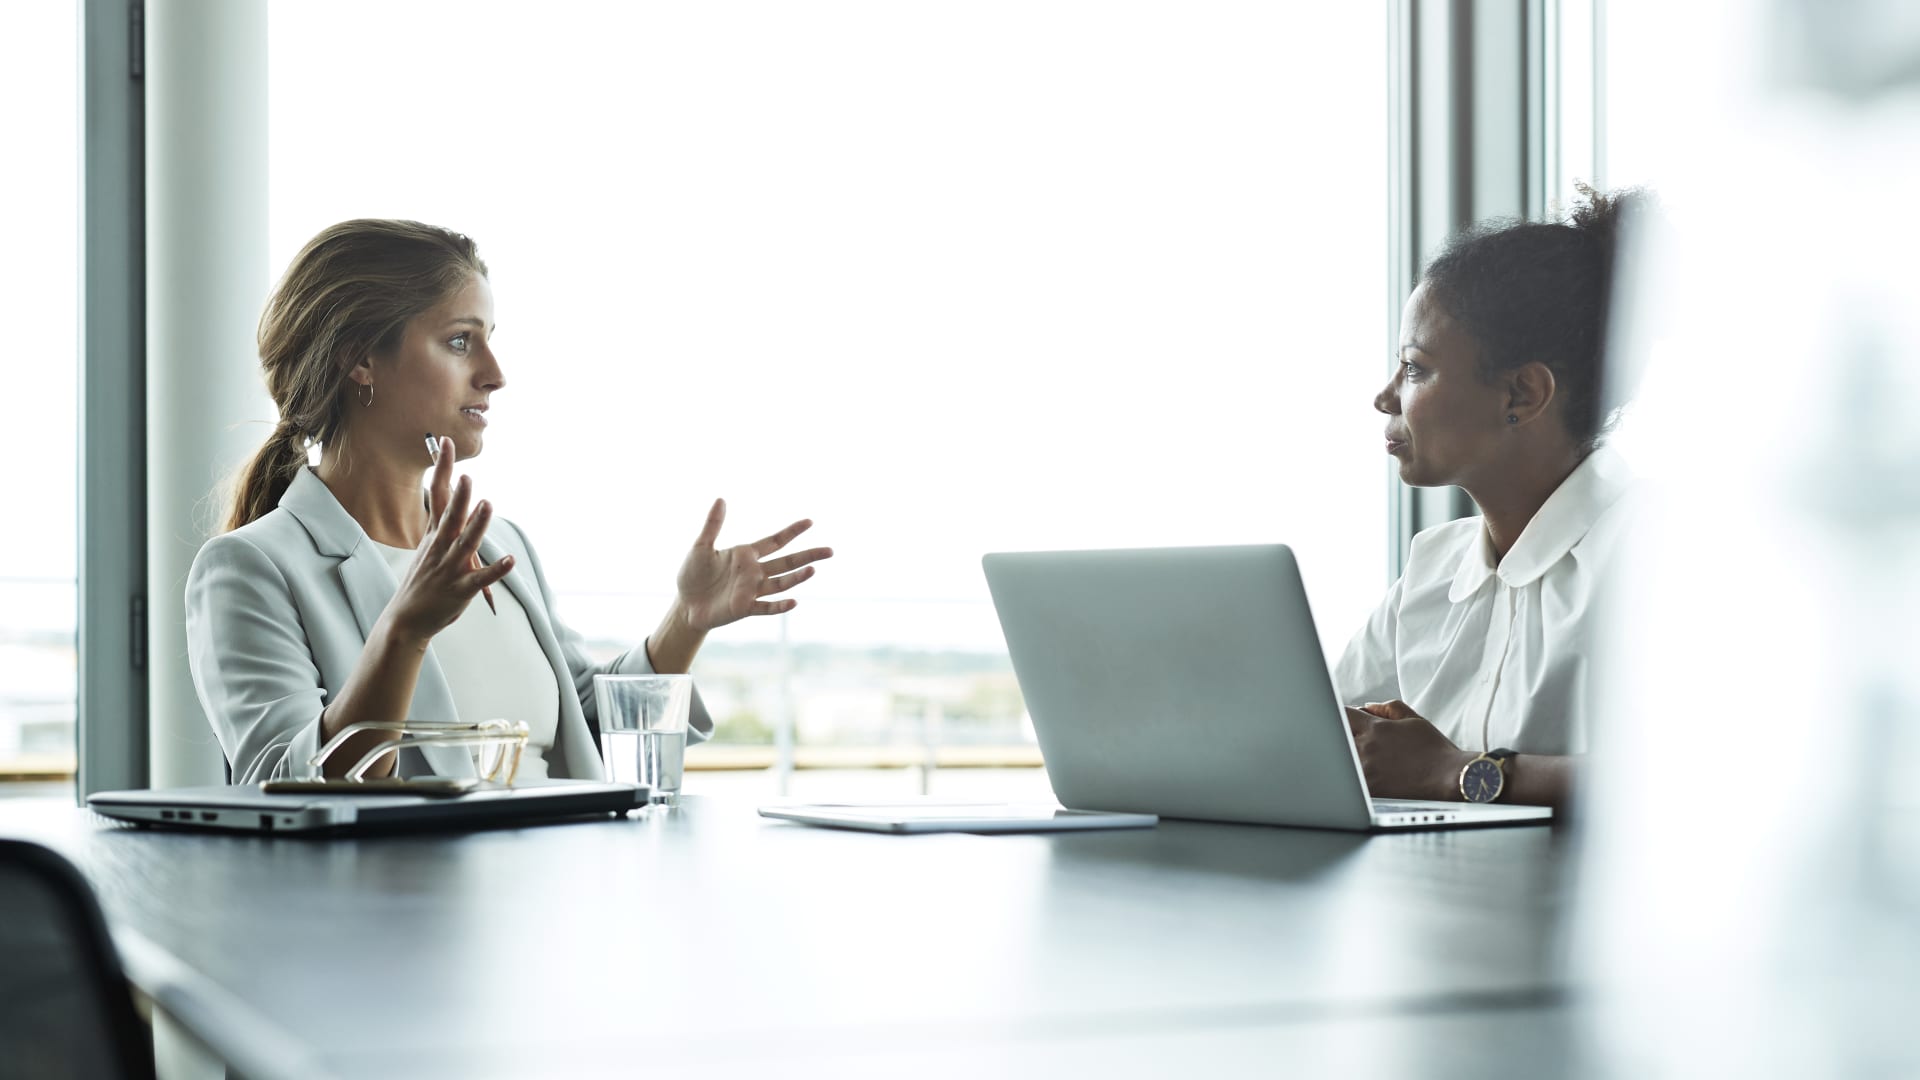 Businesswomen having discussion in conference room